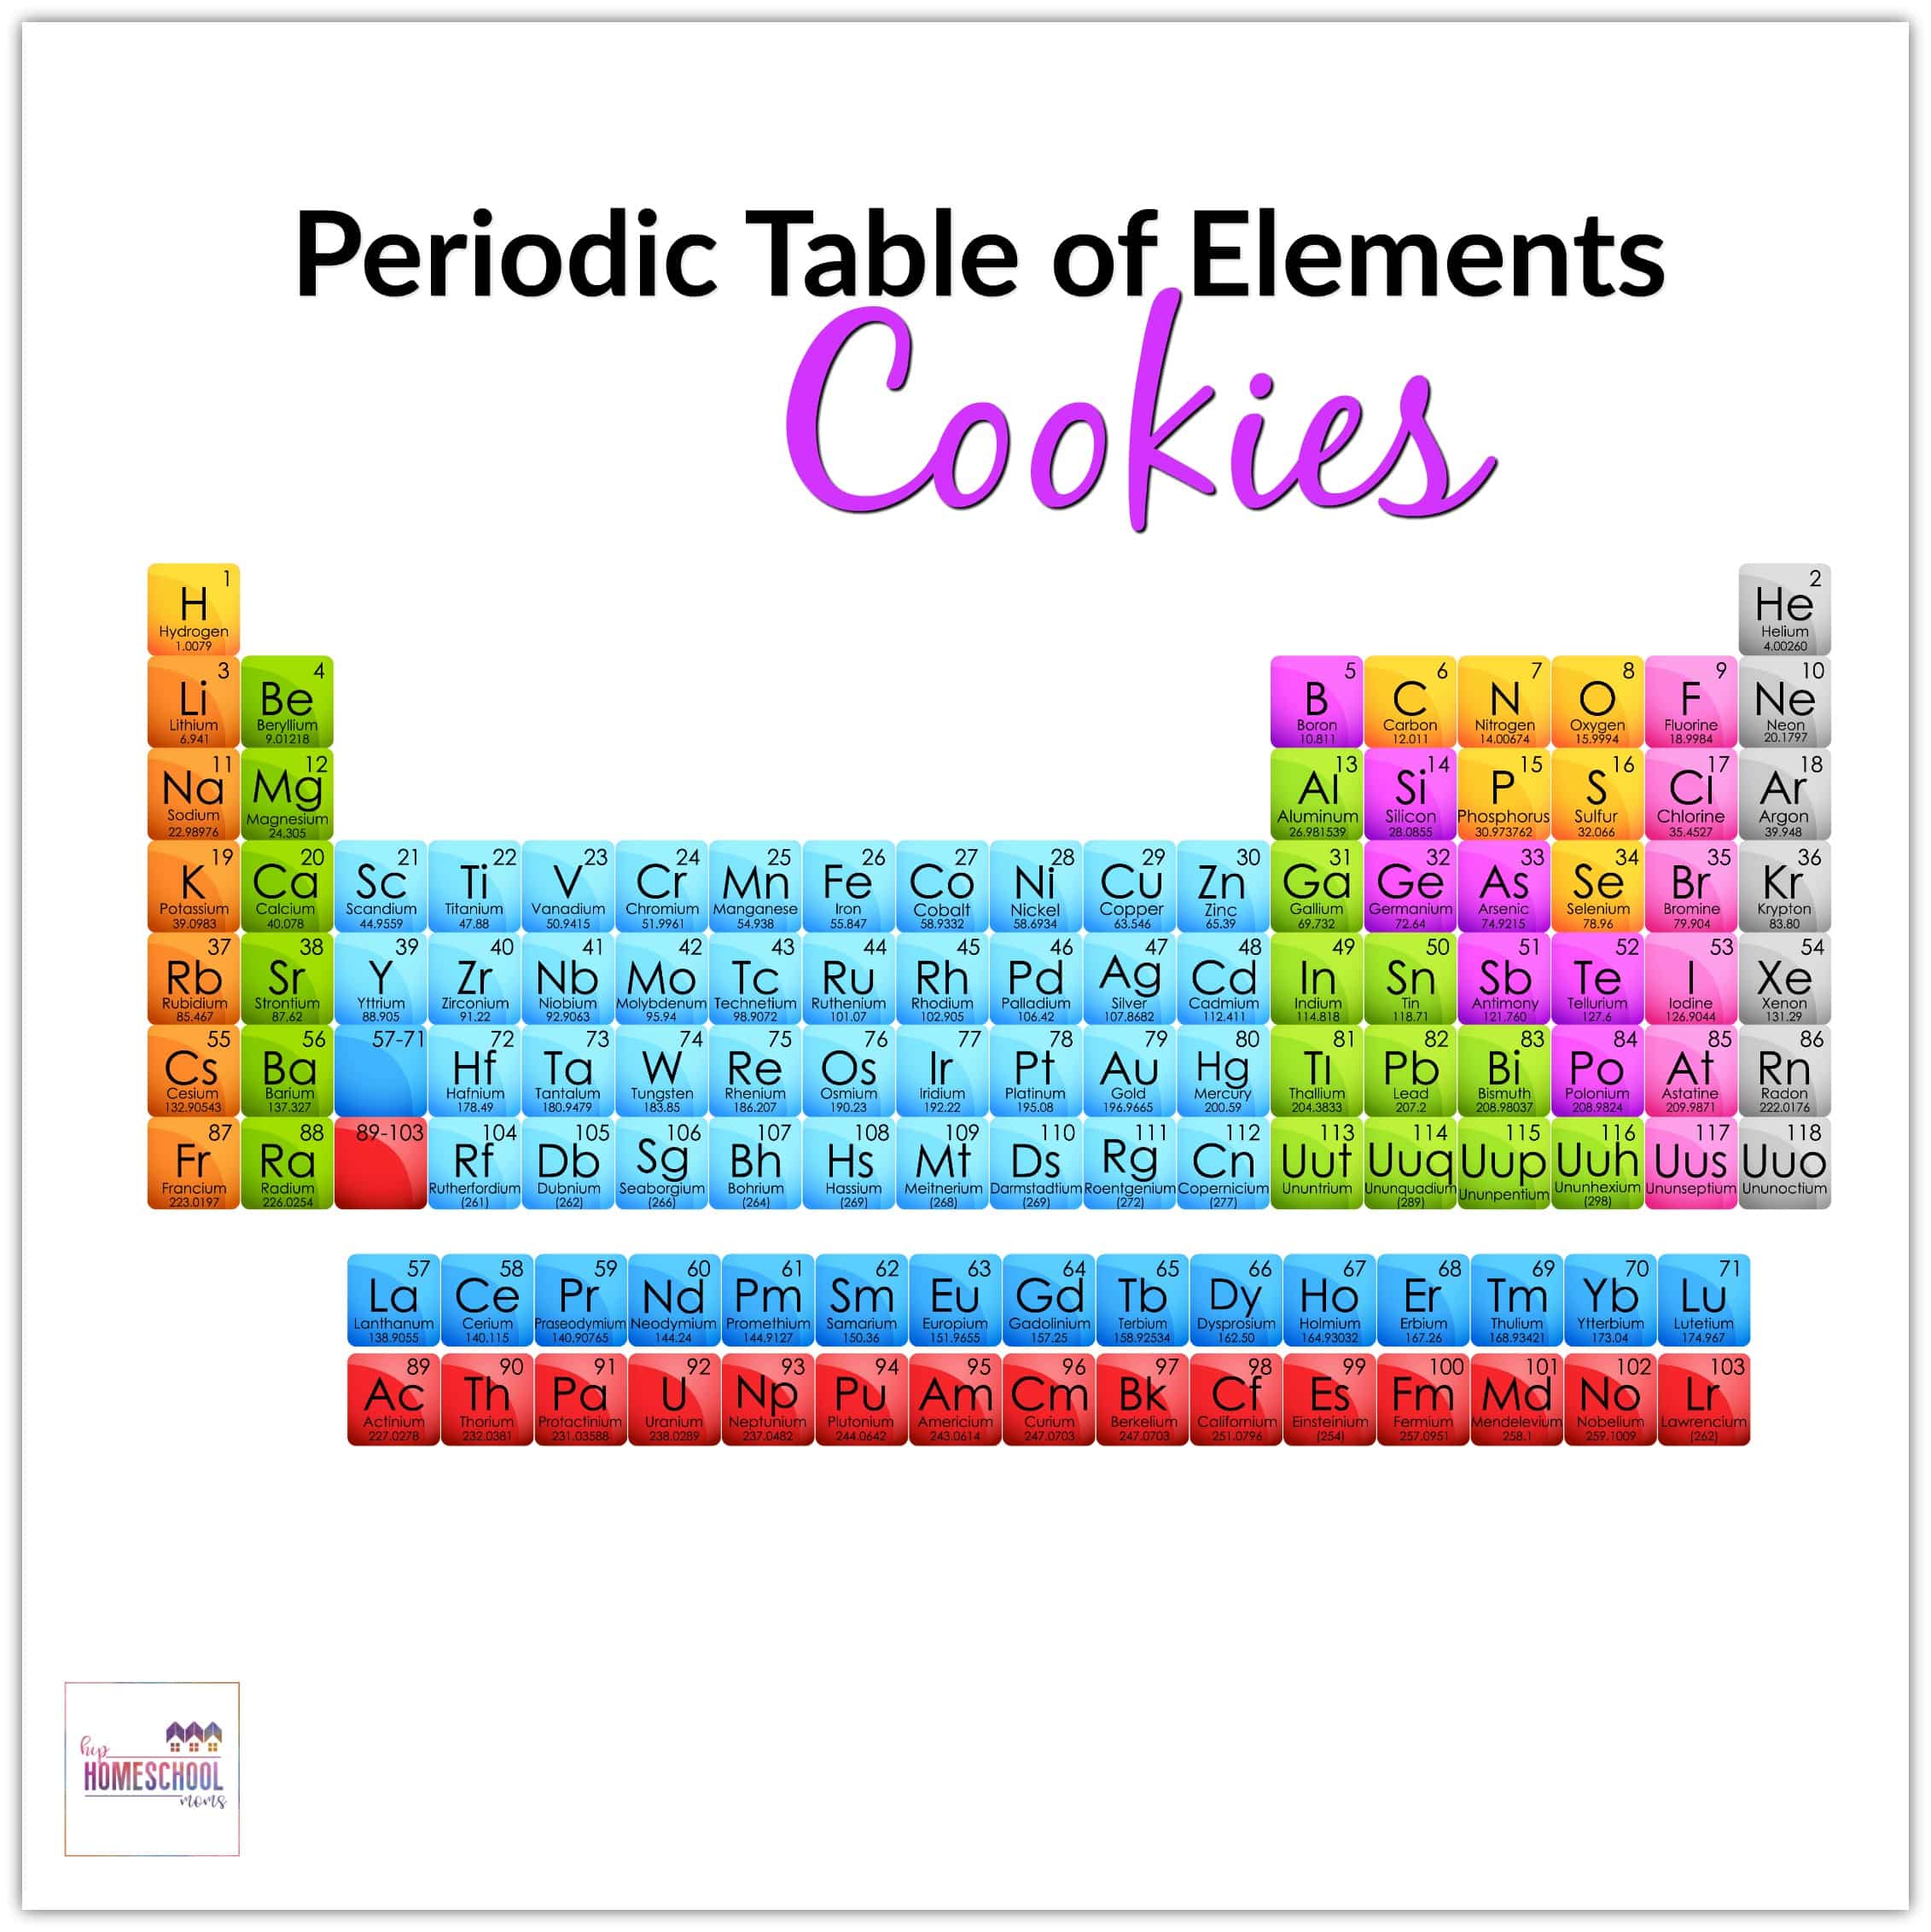 Periodic Table of Elements Project with Cookies